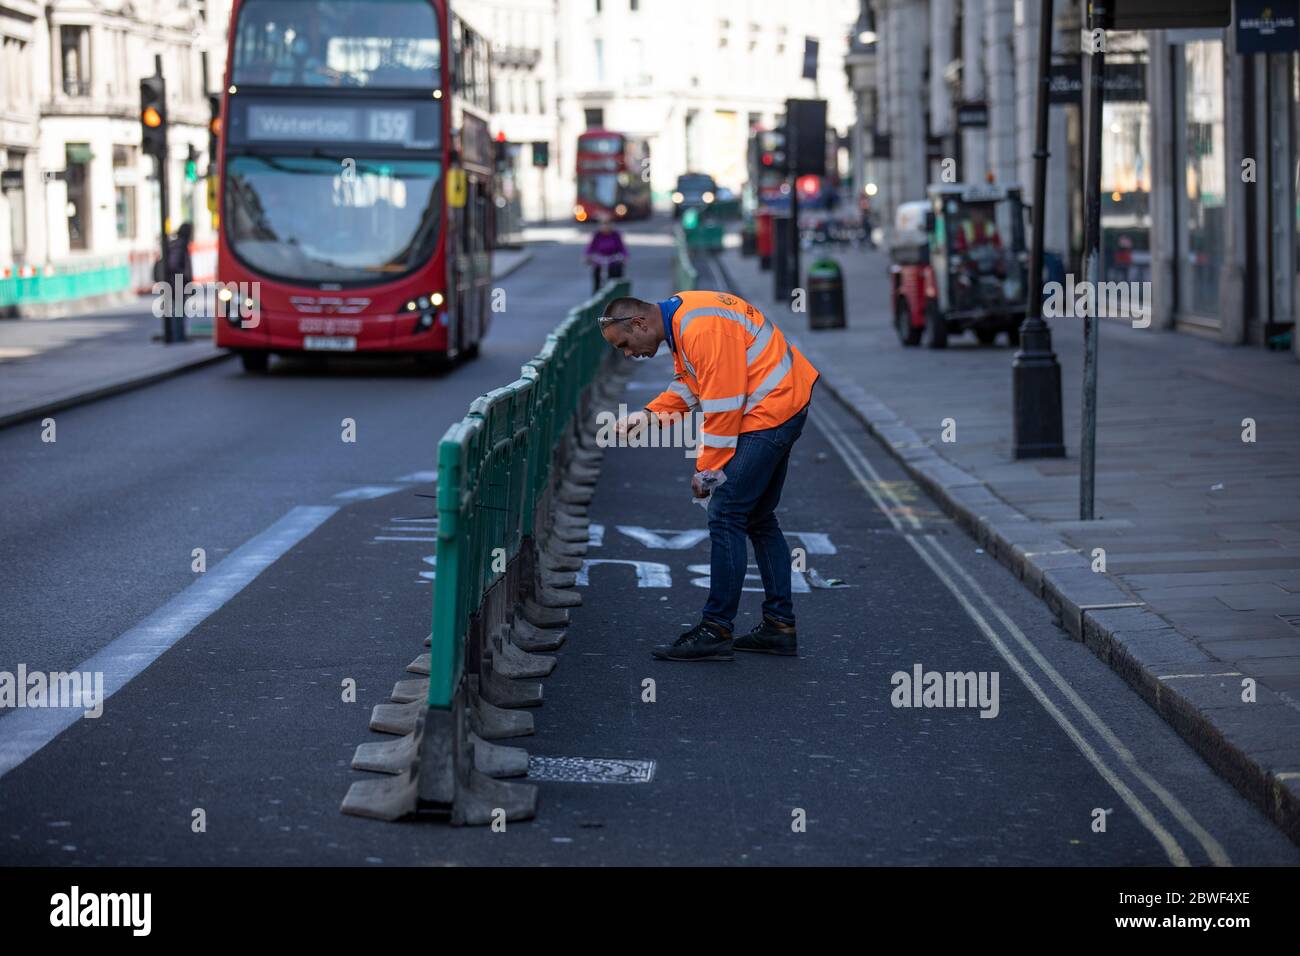 Regent Street pavements are widened for pedestrians to social distance as high streets prepare to reopen after the coronavirus lockdown, London, UK Stock Photo